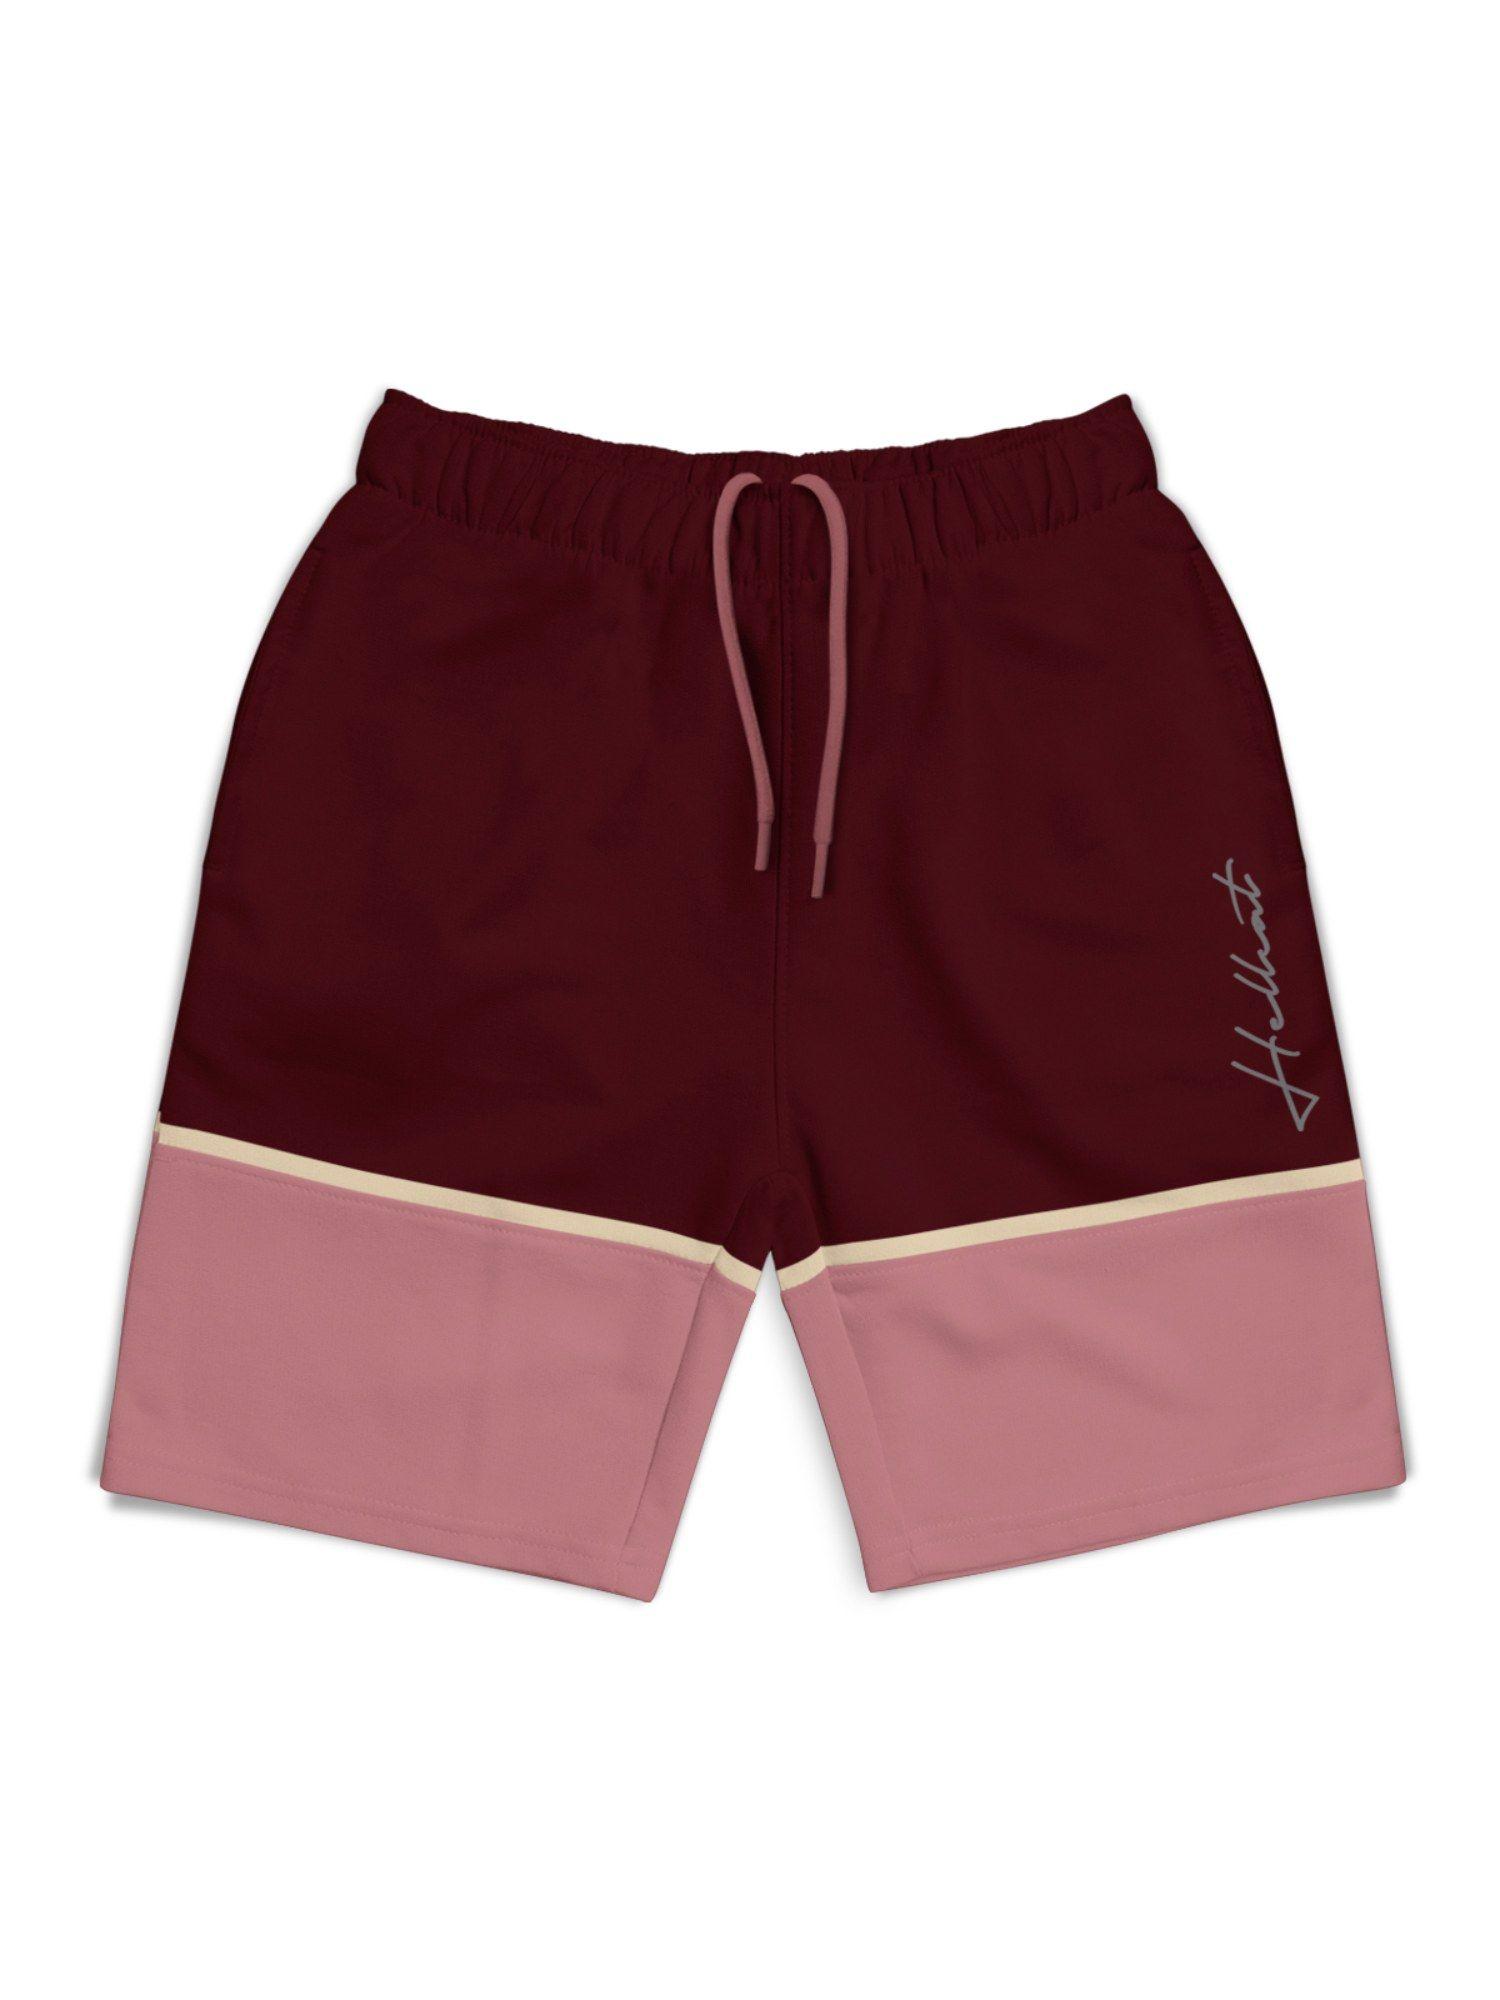 trendy-pink-colorblock-with-branding-printed-shorts